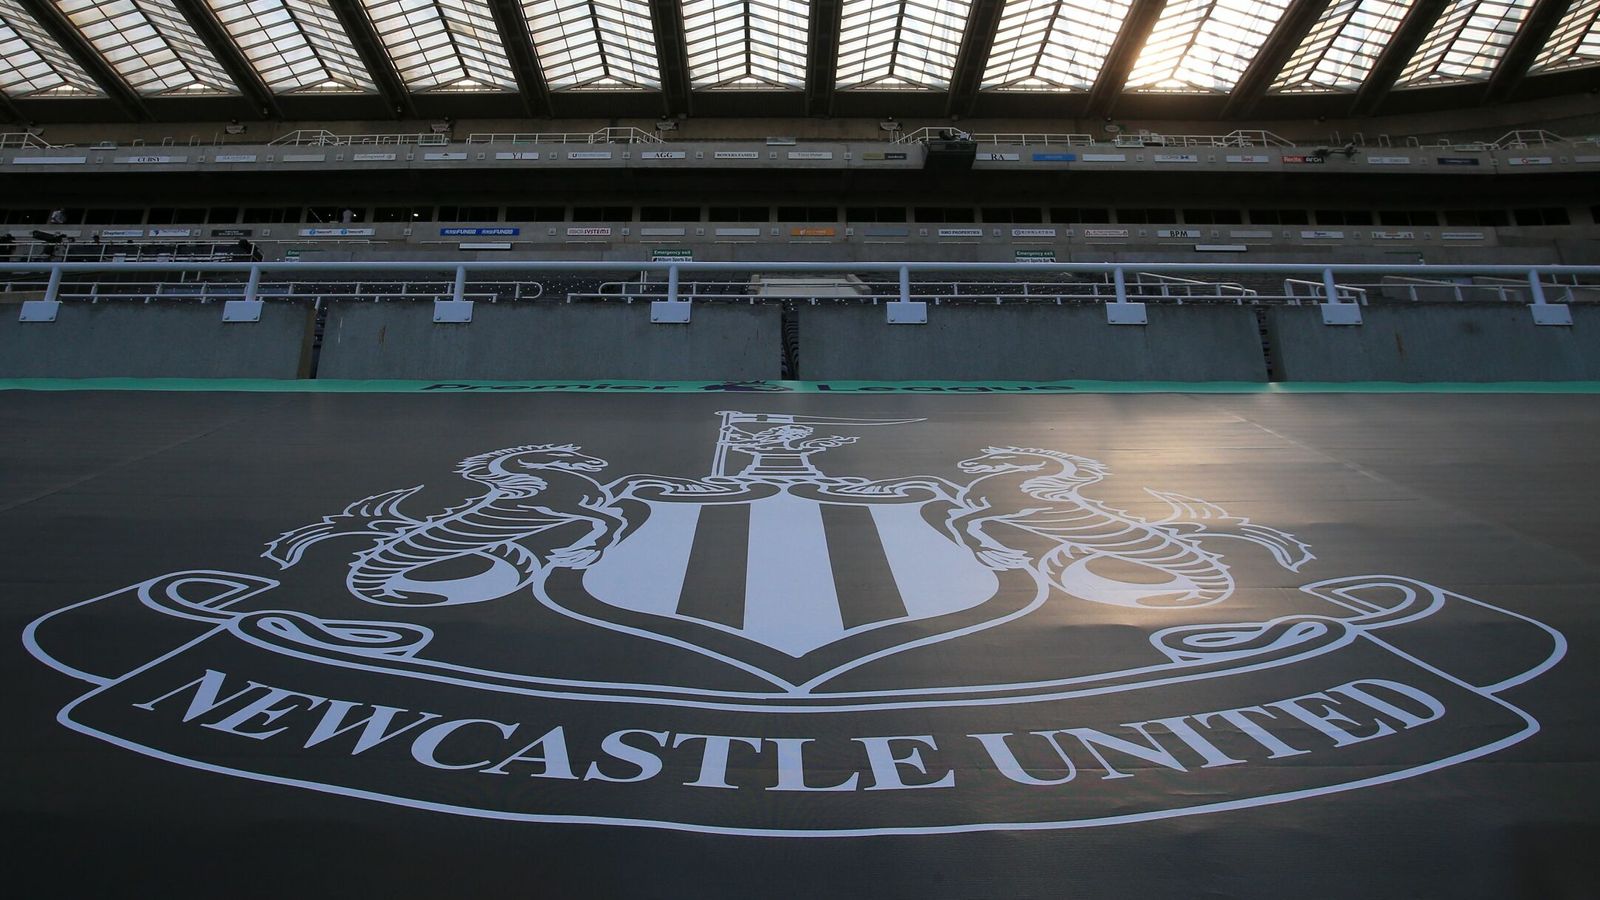 Newcastle United Supporters Services – serving who?